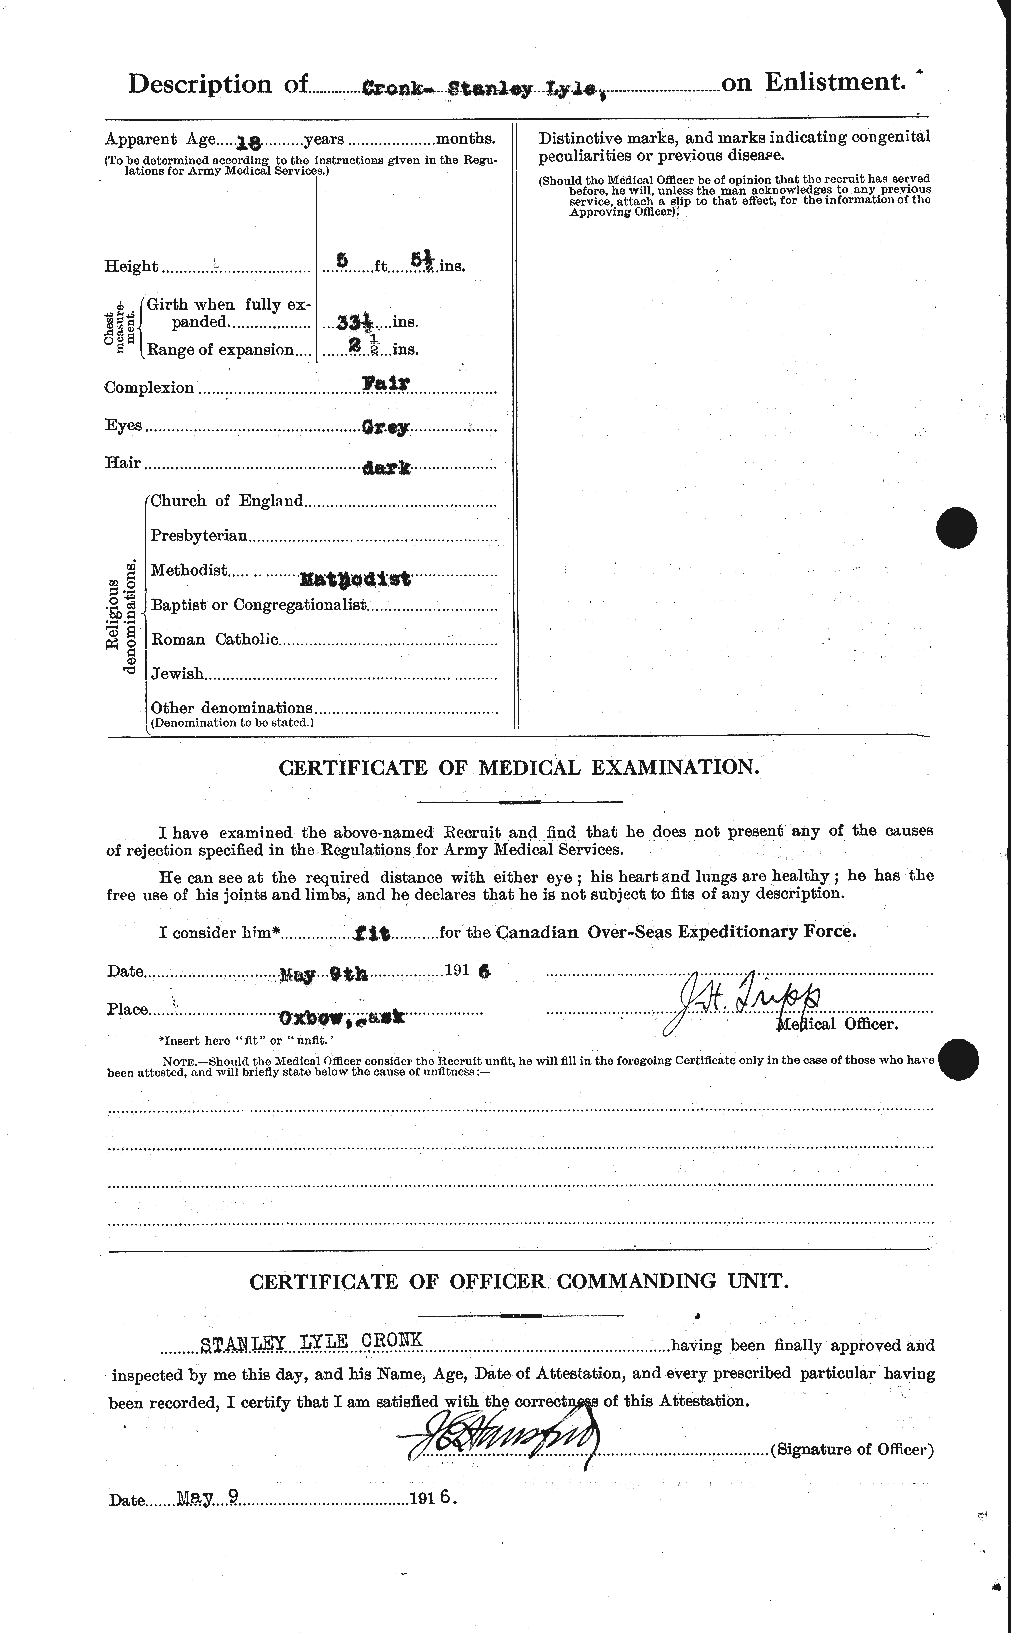 Personnel Records of the First World War - CEF 063759b